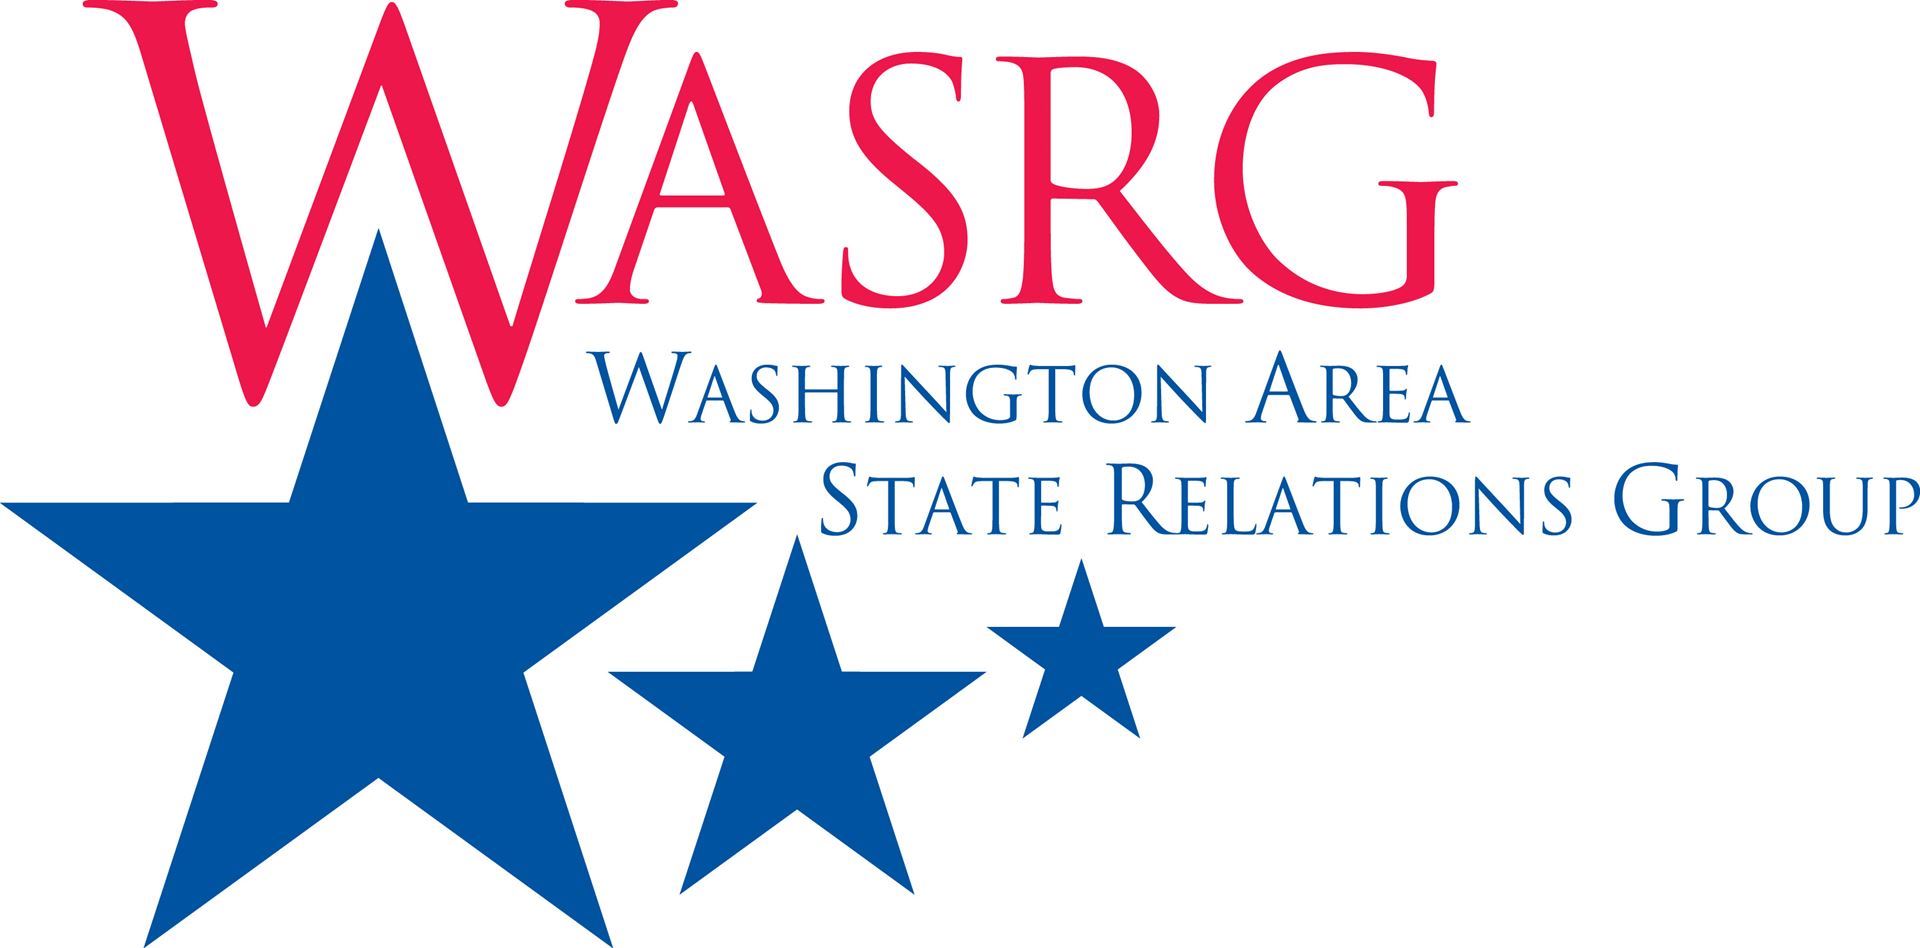 WASRG - Washington Area State Relations Group